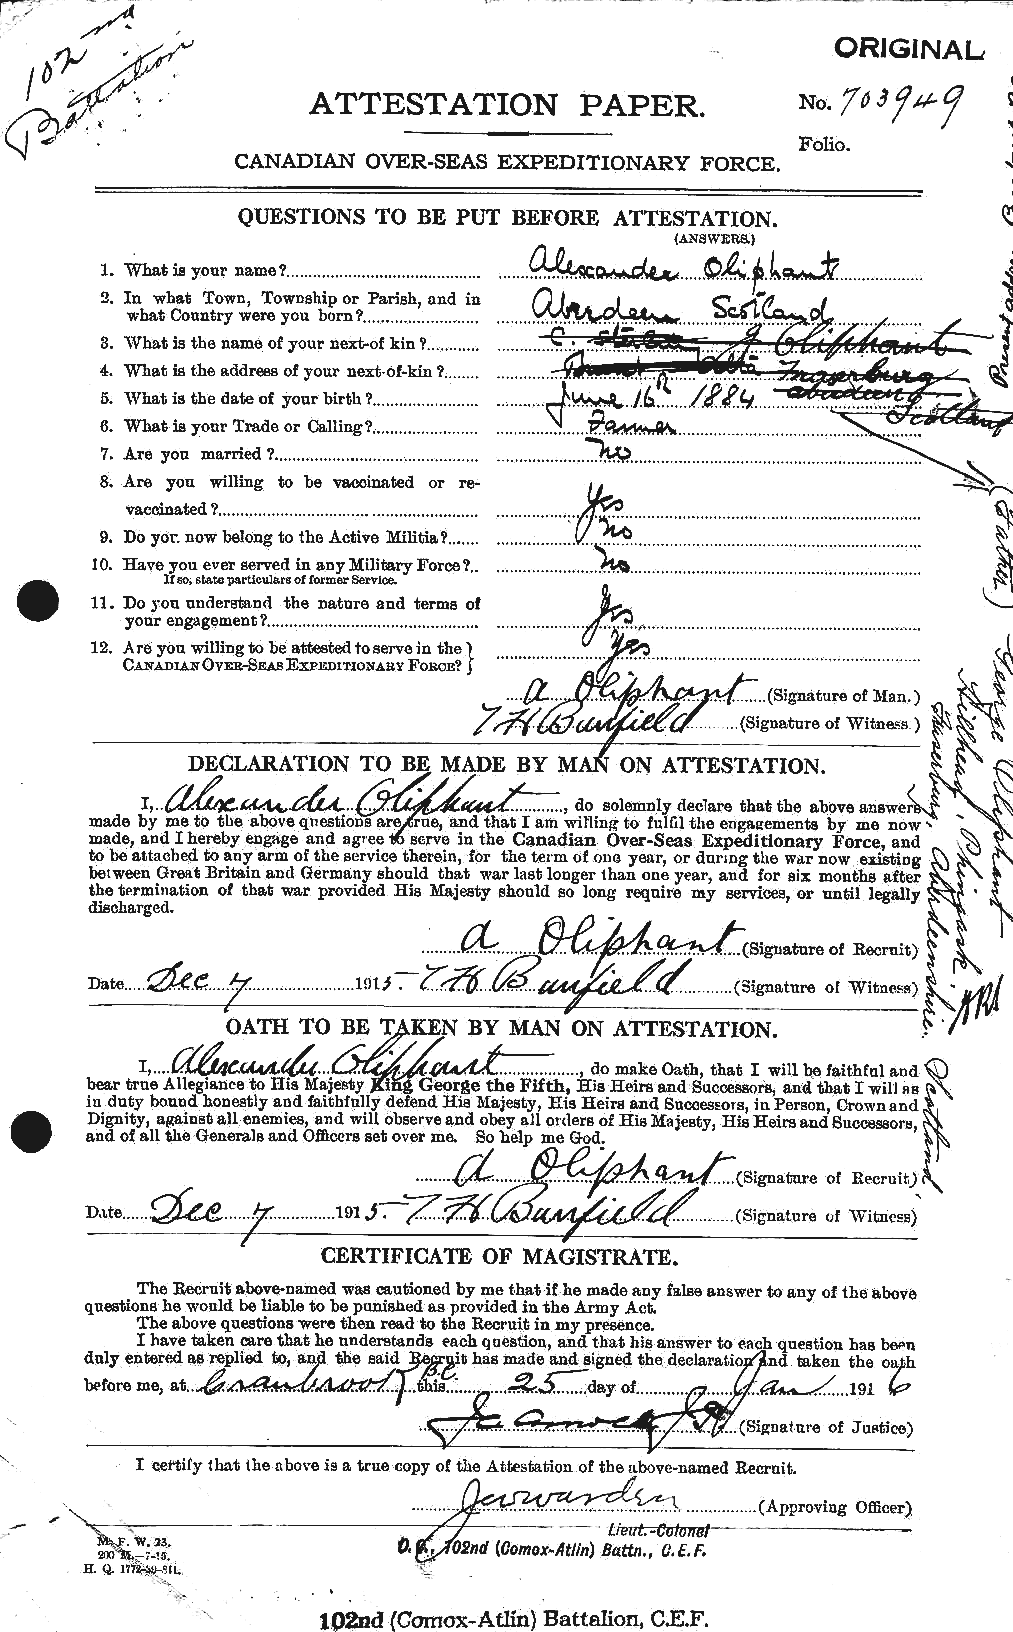 Personnel Records of the First World War - CEF 557051a